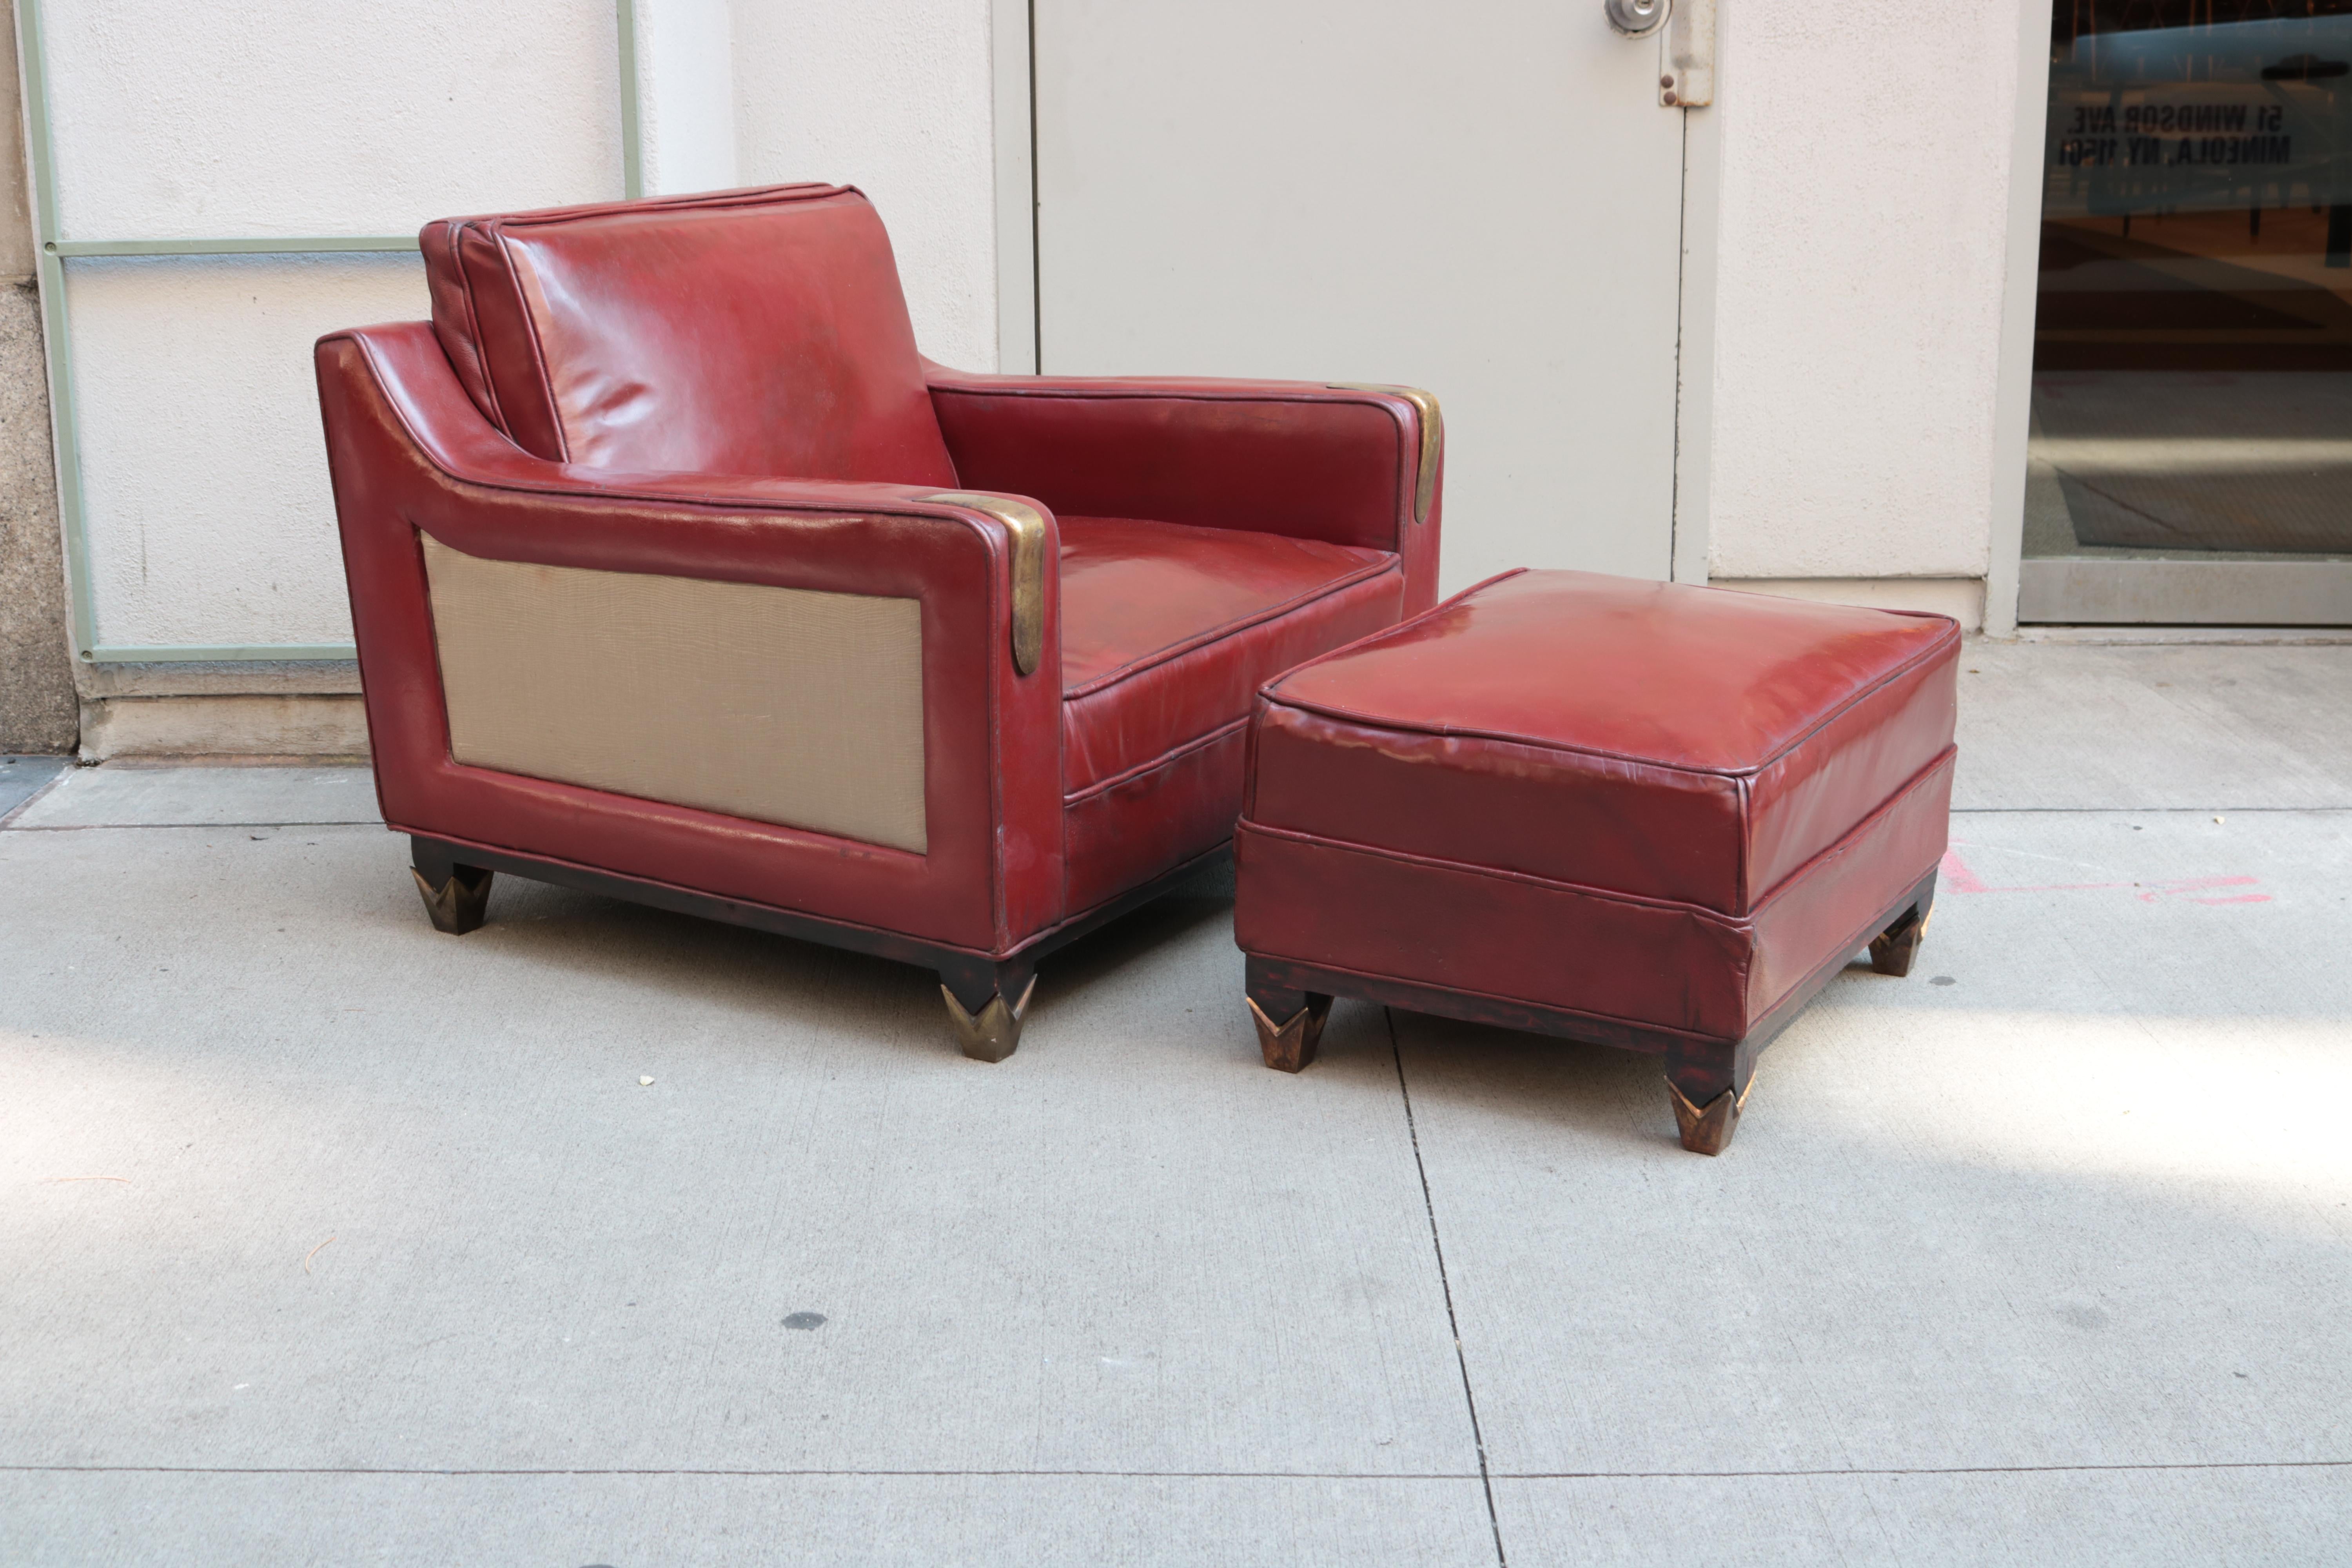 A Mid-Century Modern leather club chair with matching ottoman. 
Attributed to Arturo Pani. 
Original red leather, patinated brass and wood.